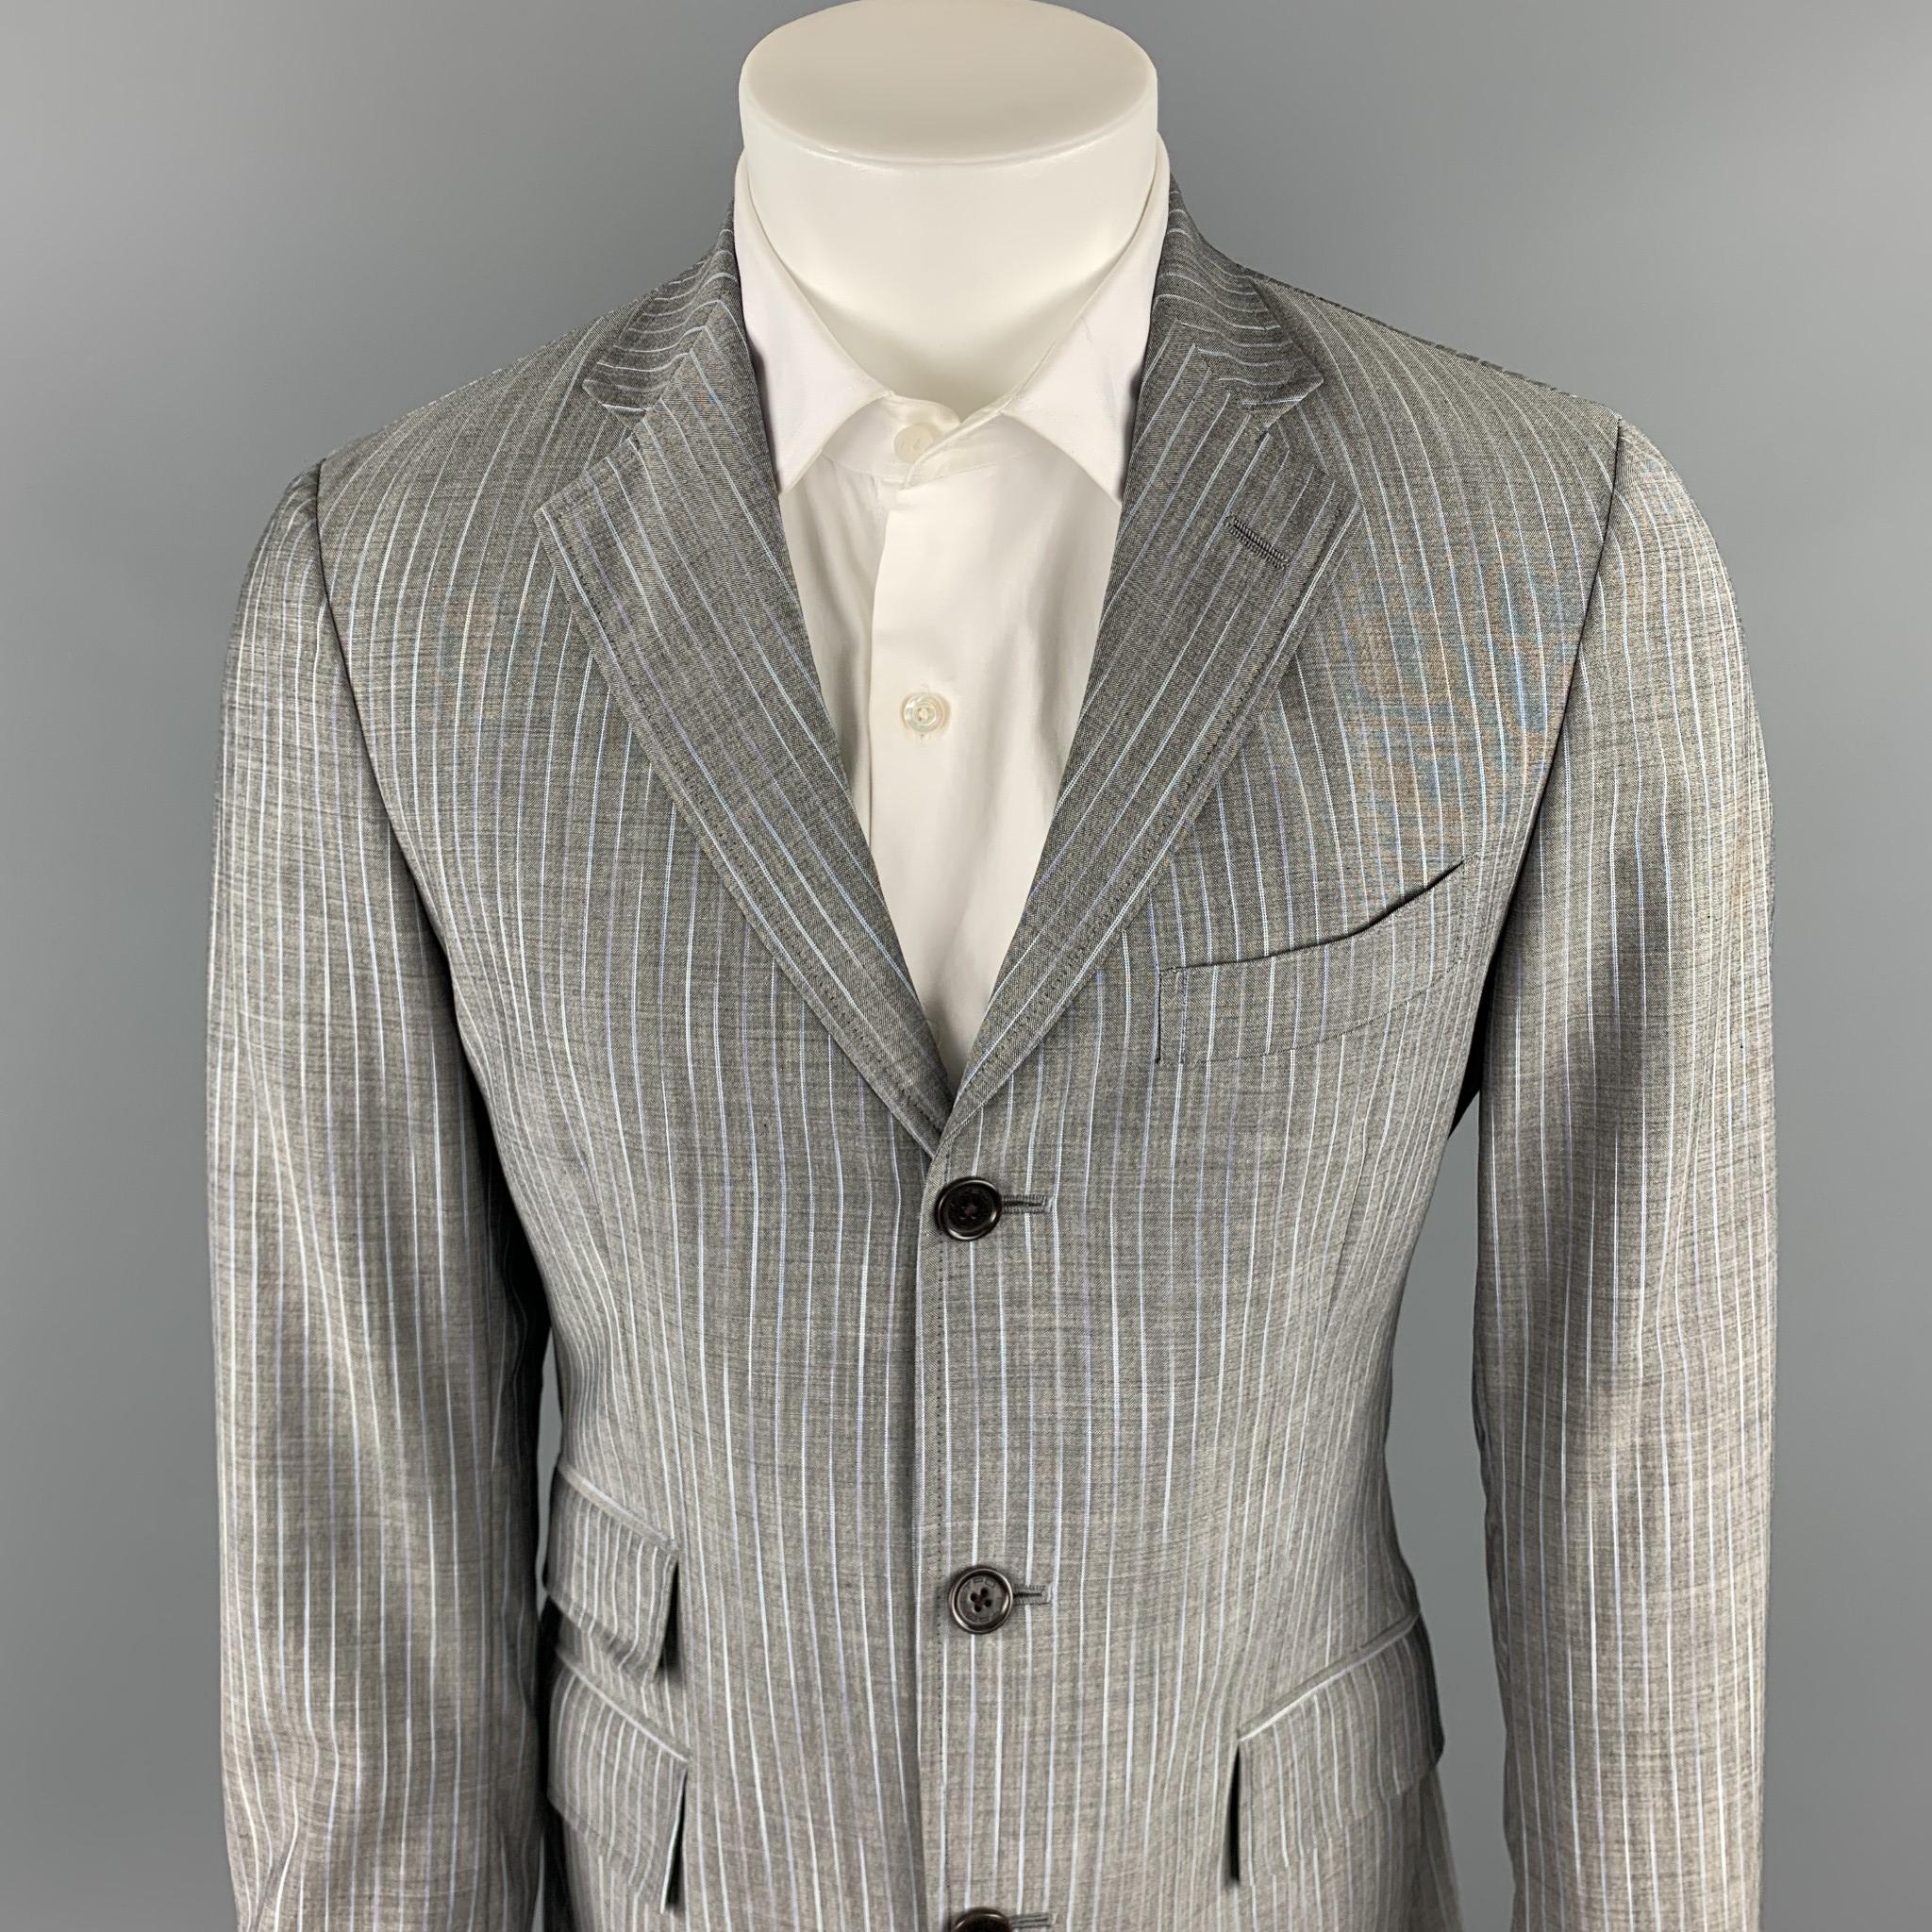 ETRO suit comes in a gray stripe wool / mohair with a multi-color print liner and includes a single breasted, three button sport coat with a notch lapel and matching  flat front trousers.  Made in Italy.

New With Tags.
Marked: IT